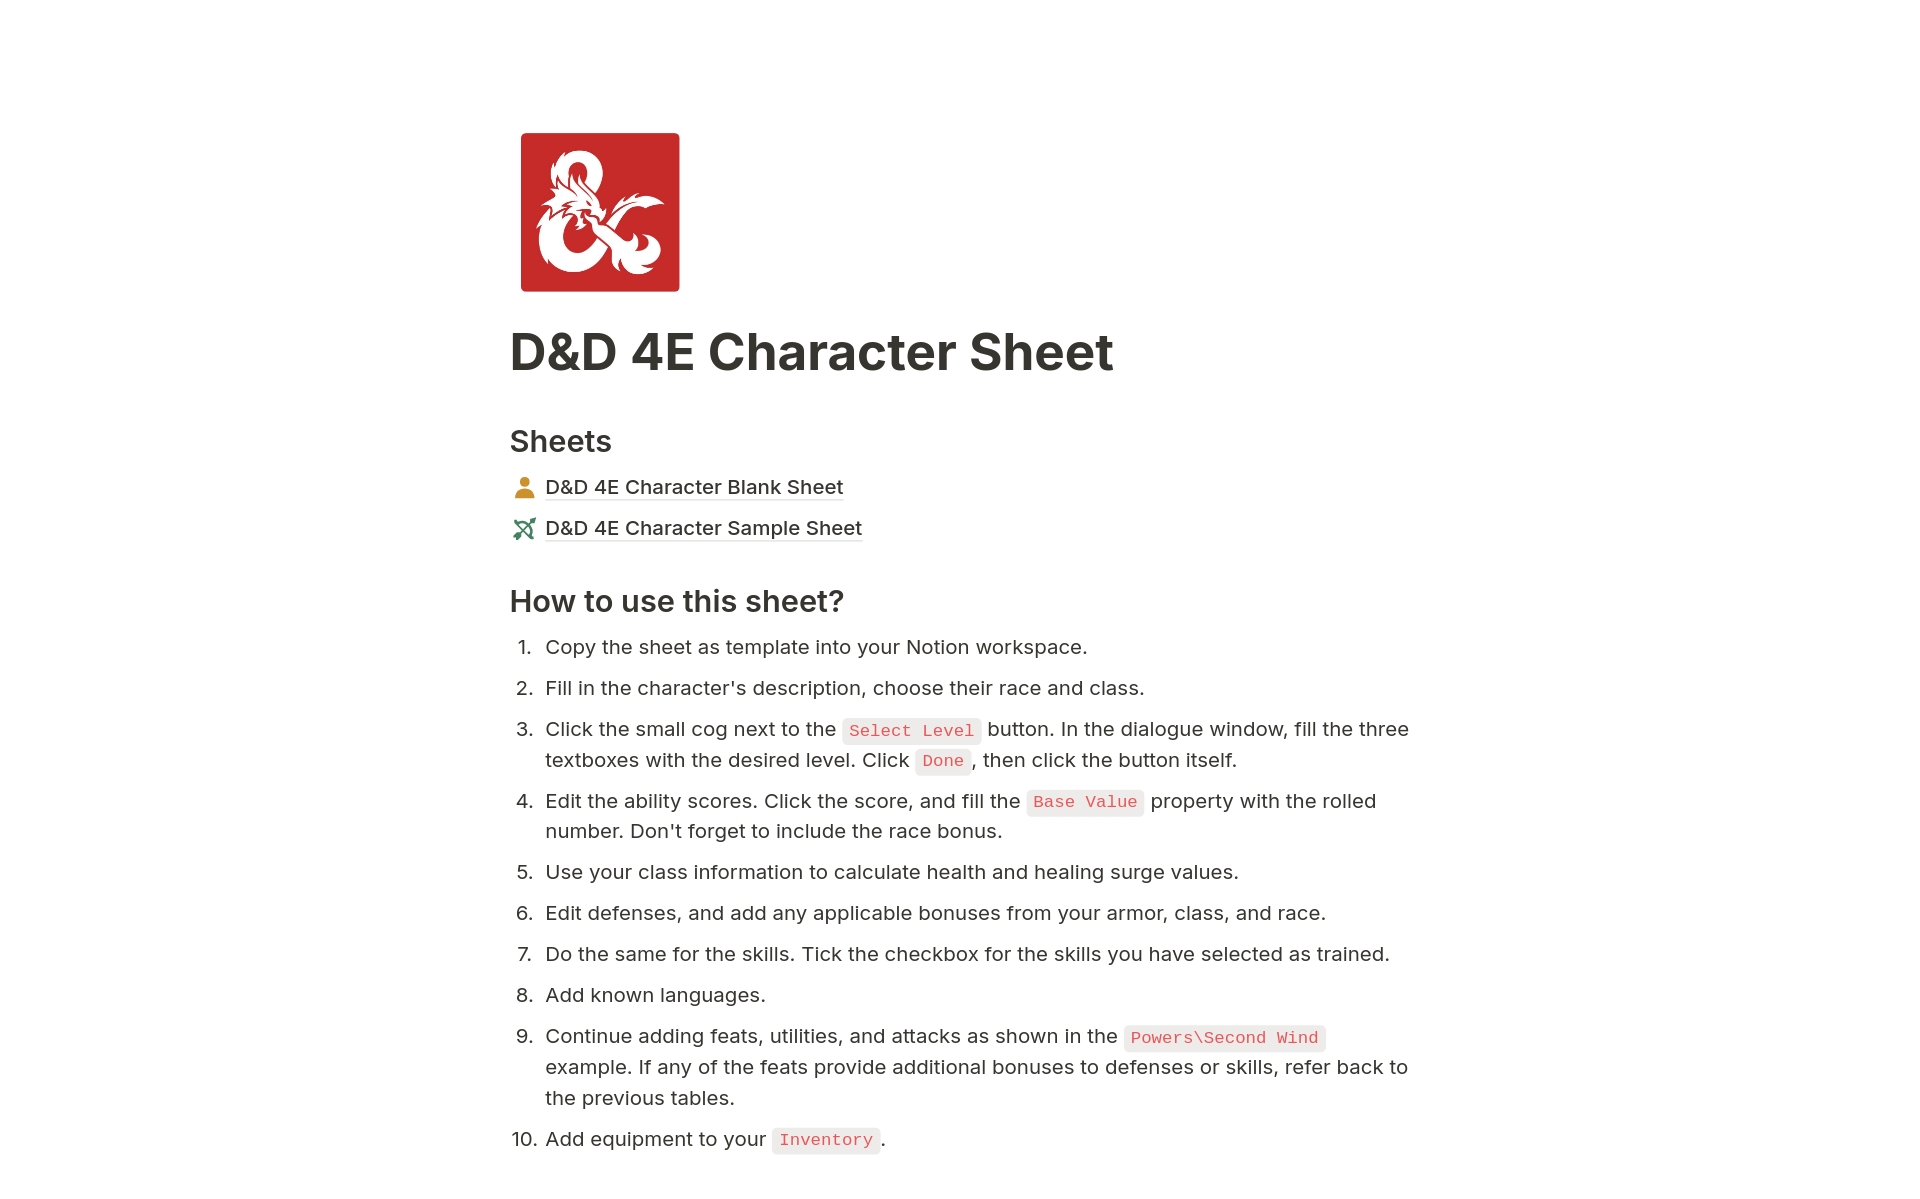 D&D 4e Character Sheet. It is semi-automated, integrating math for skills and defenses. It features buttons for setting character levels and resetting used powers during rests. The template comes with a pre-filled sample character as well as a blank page.